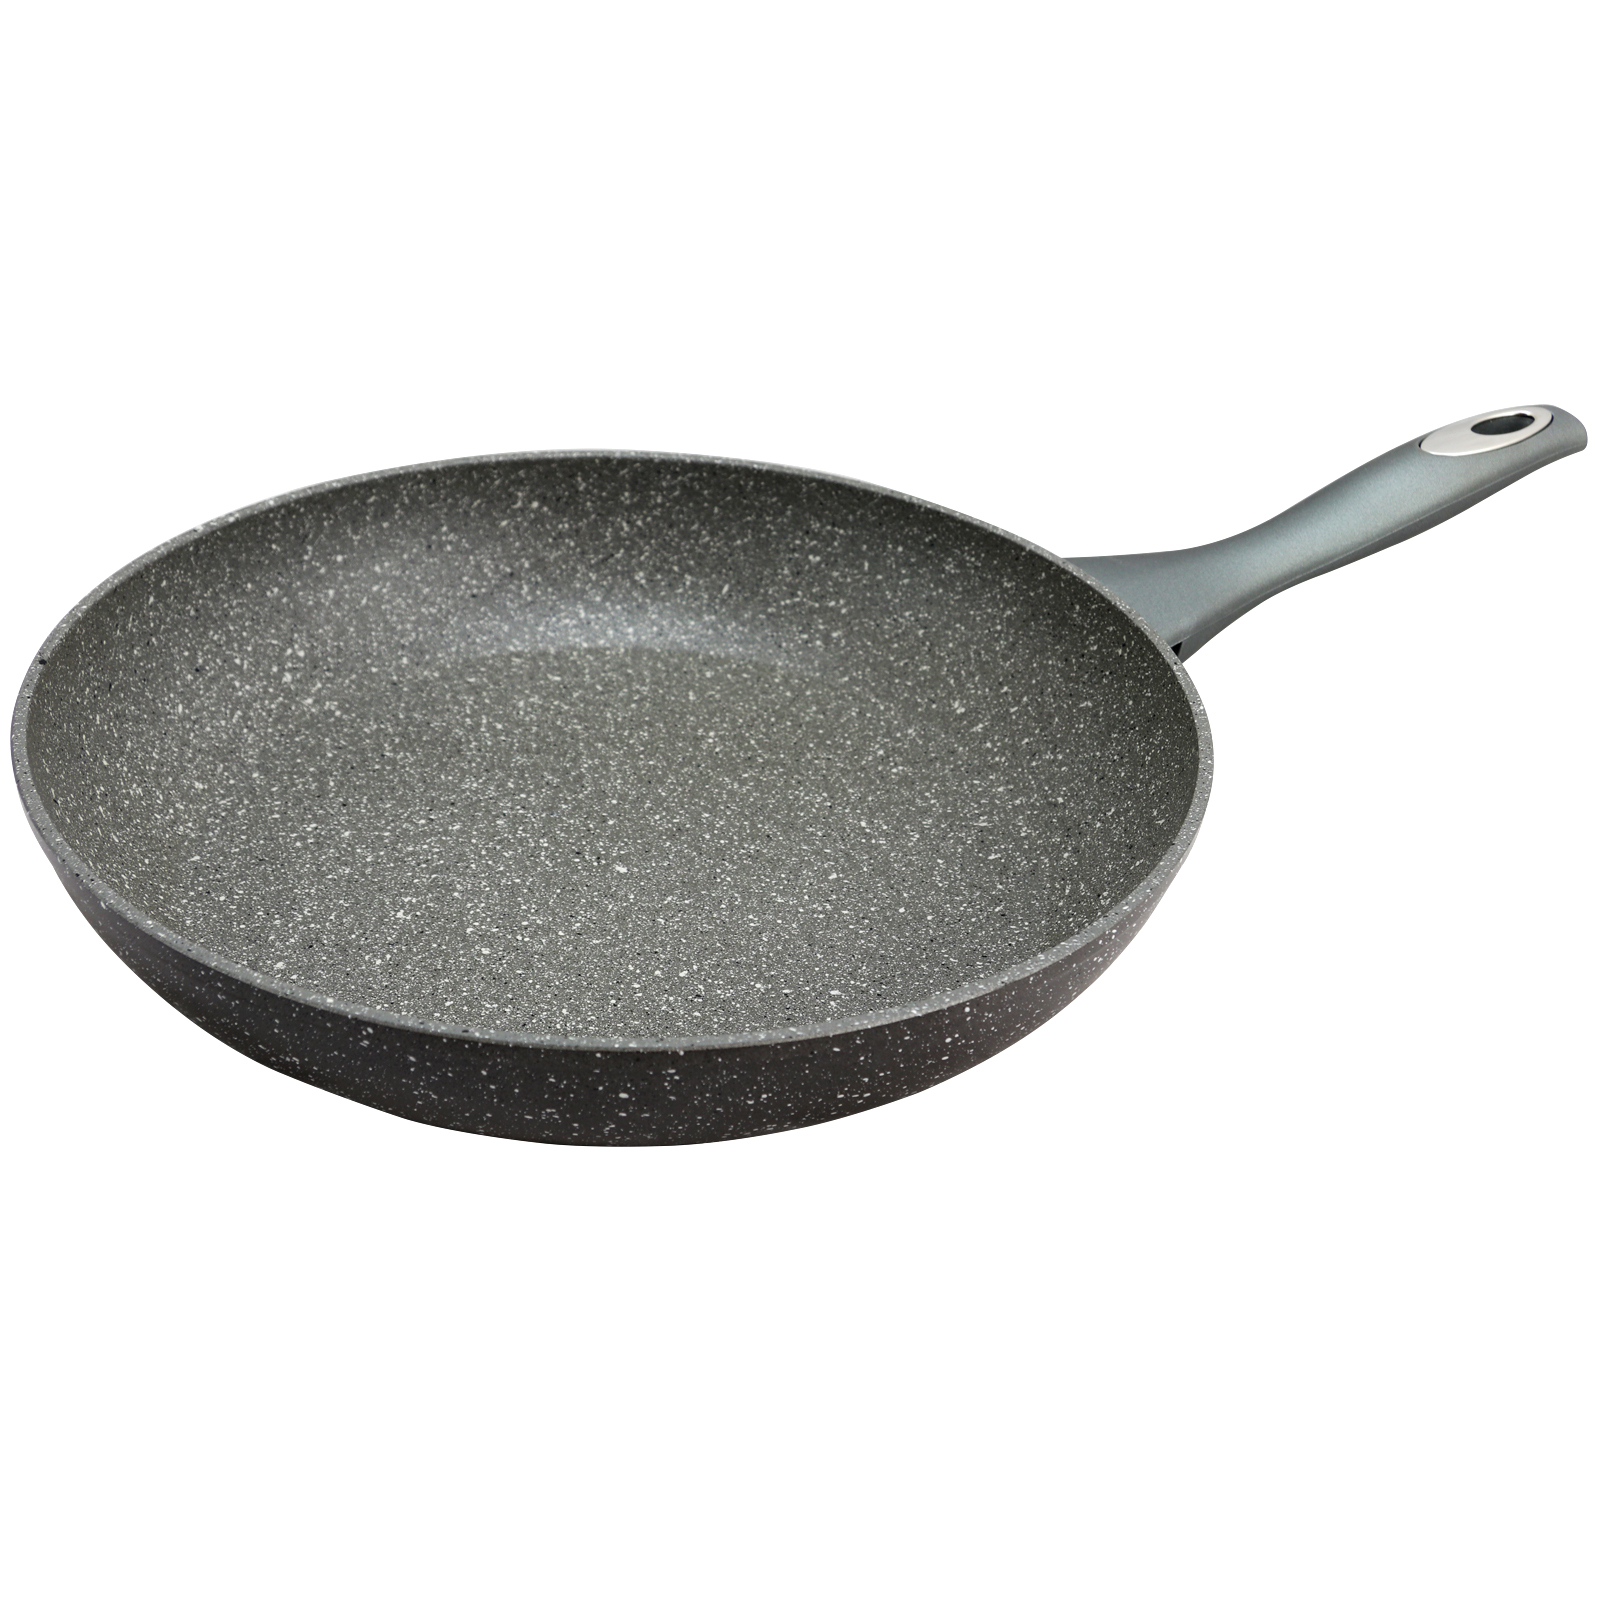 Oster Caswell 12 inch Aluminum Frying Pan in Grey Marble